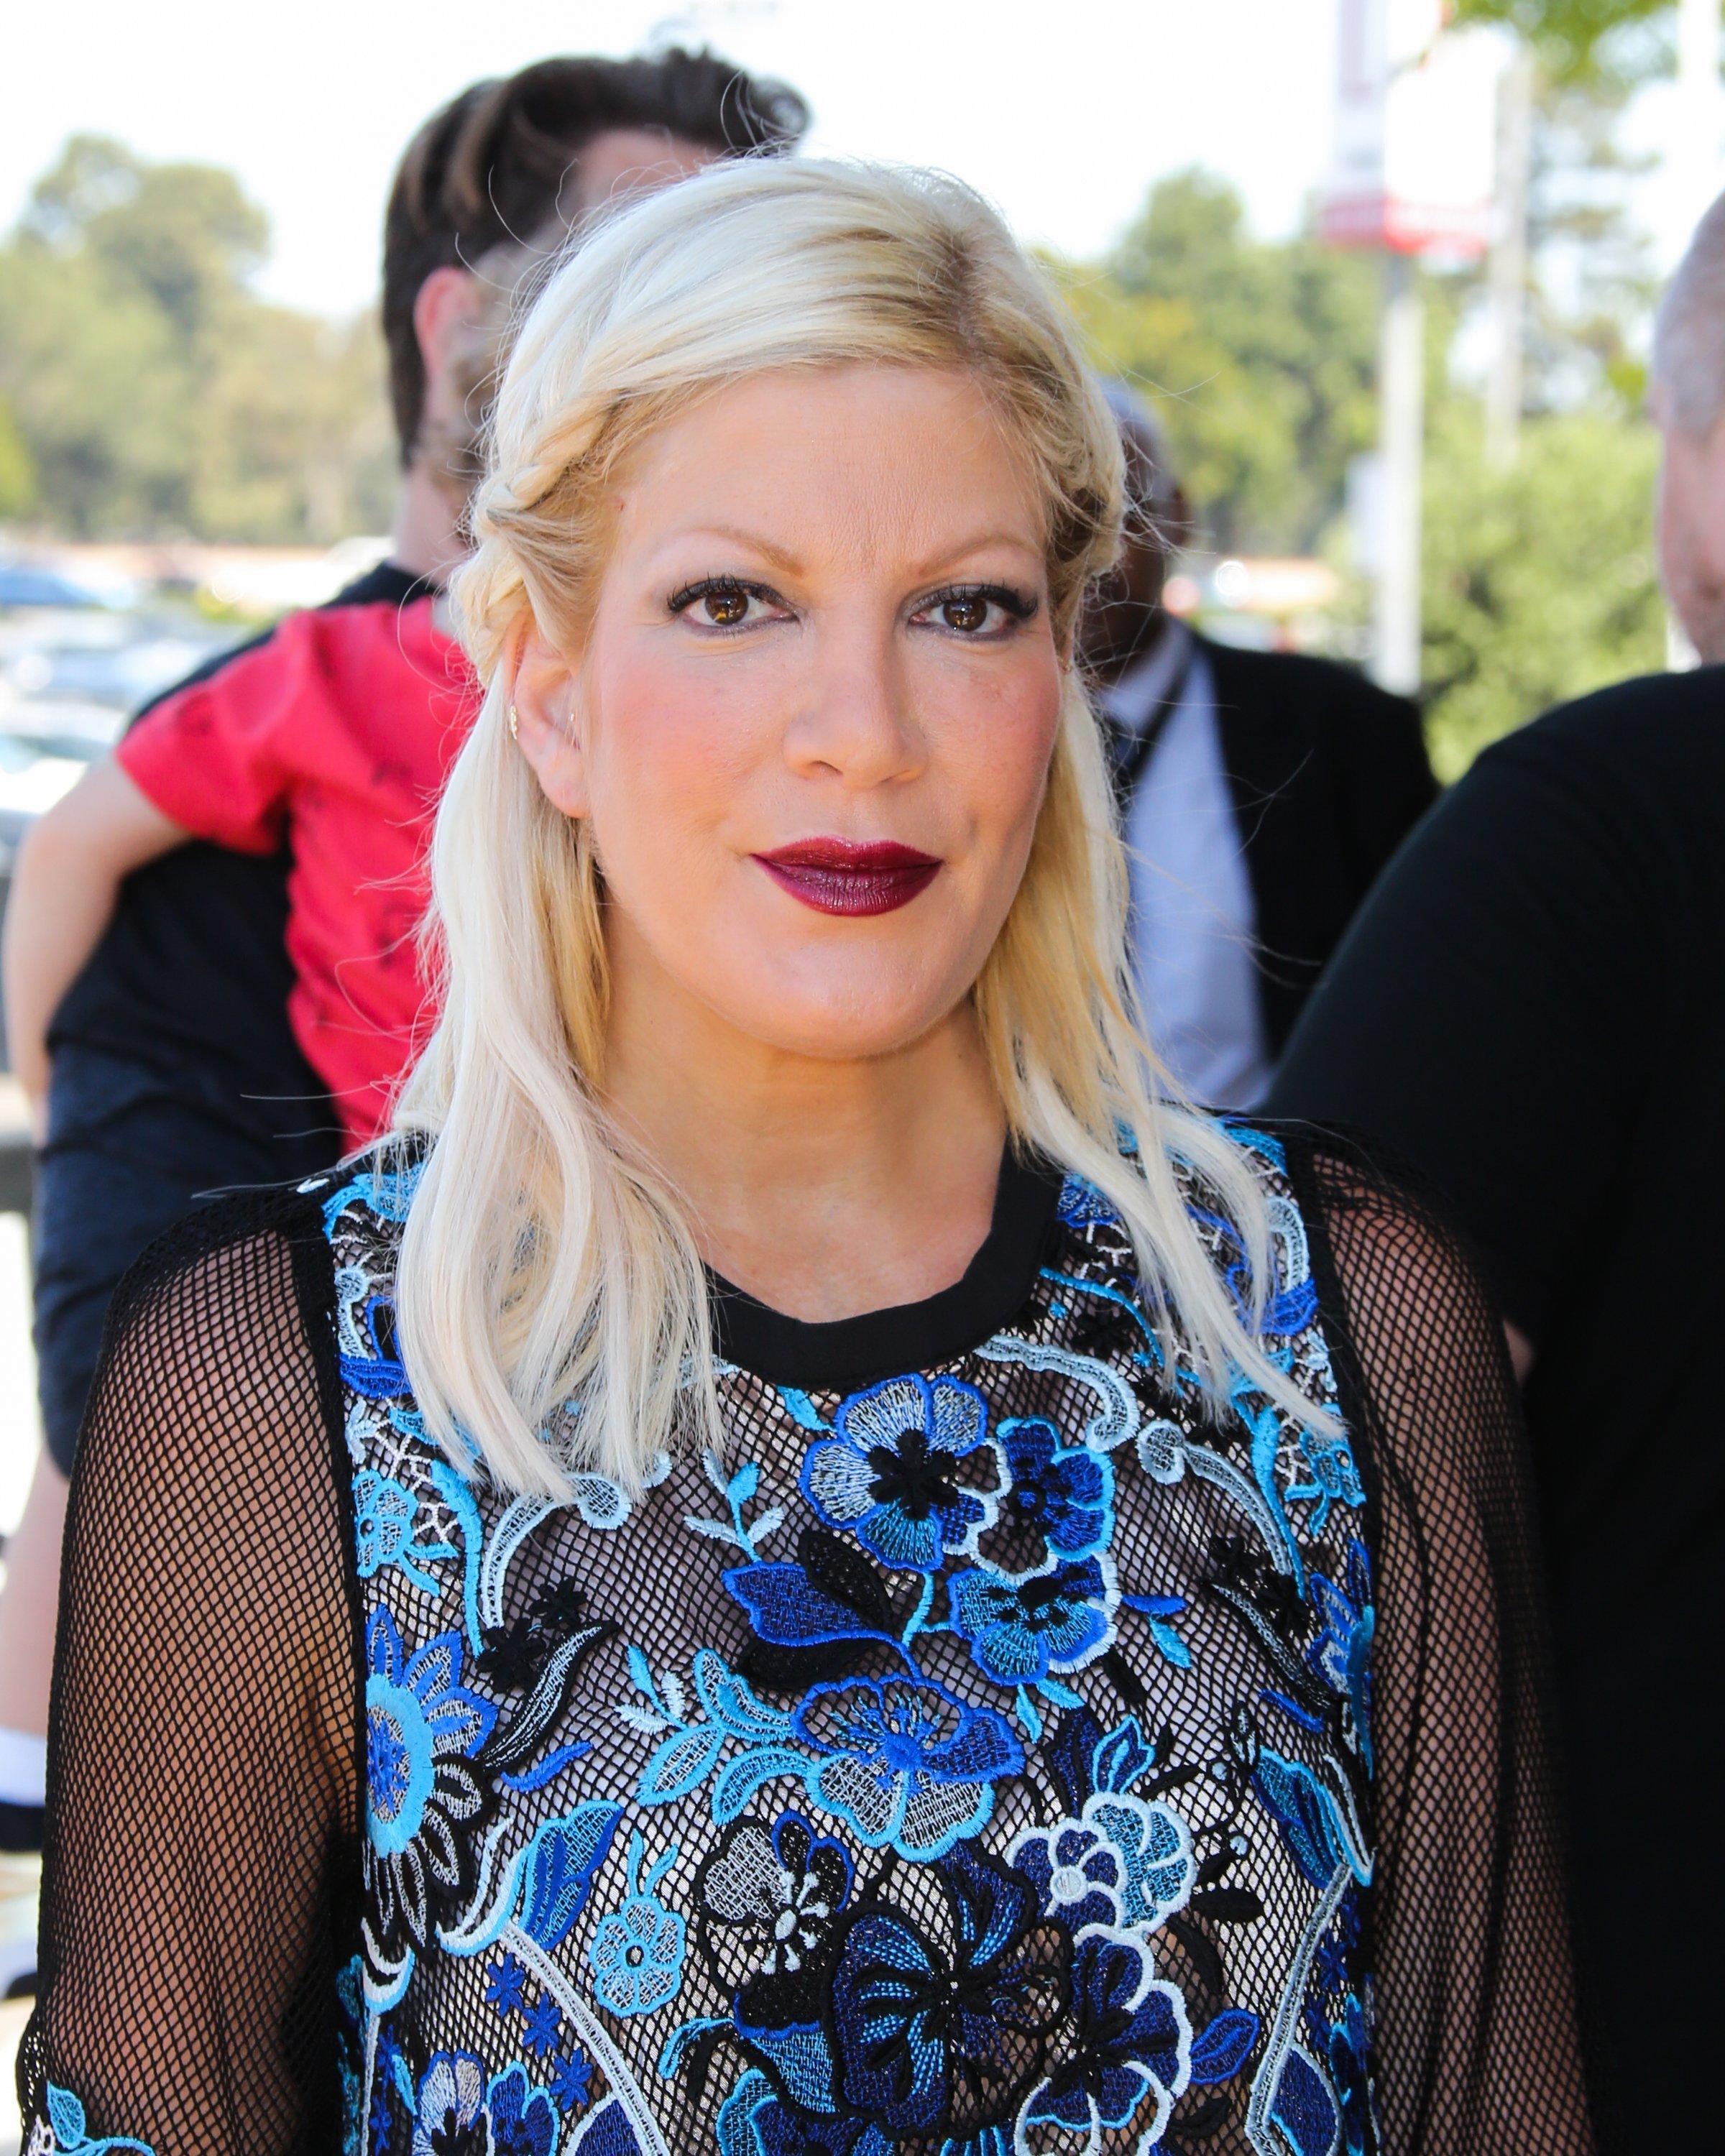 Tori Spelling, former actor of Beverly Hills 90210 | Photo: Getty Images